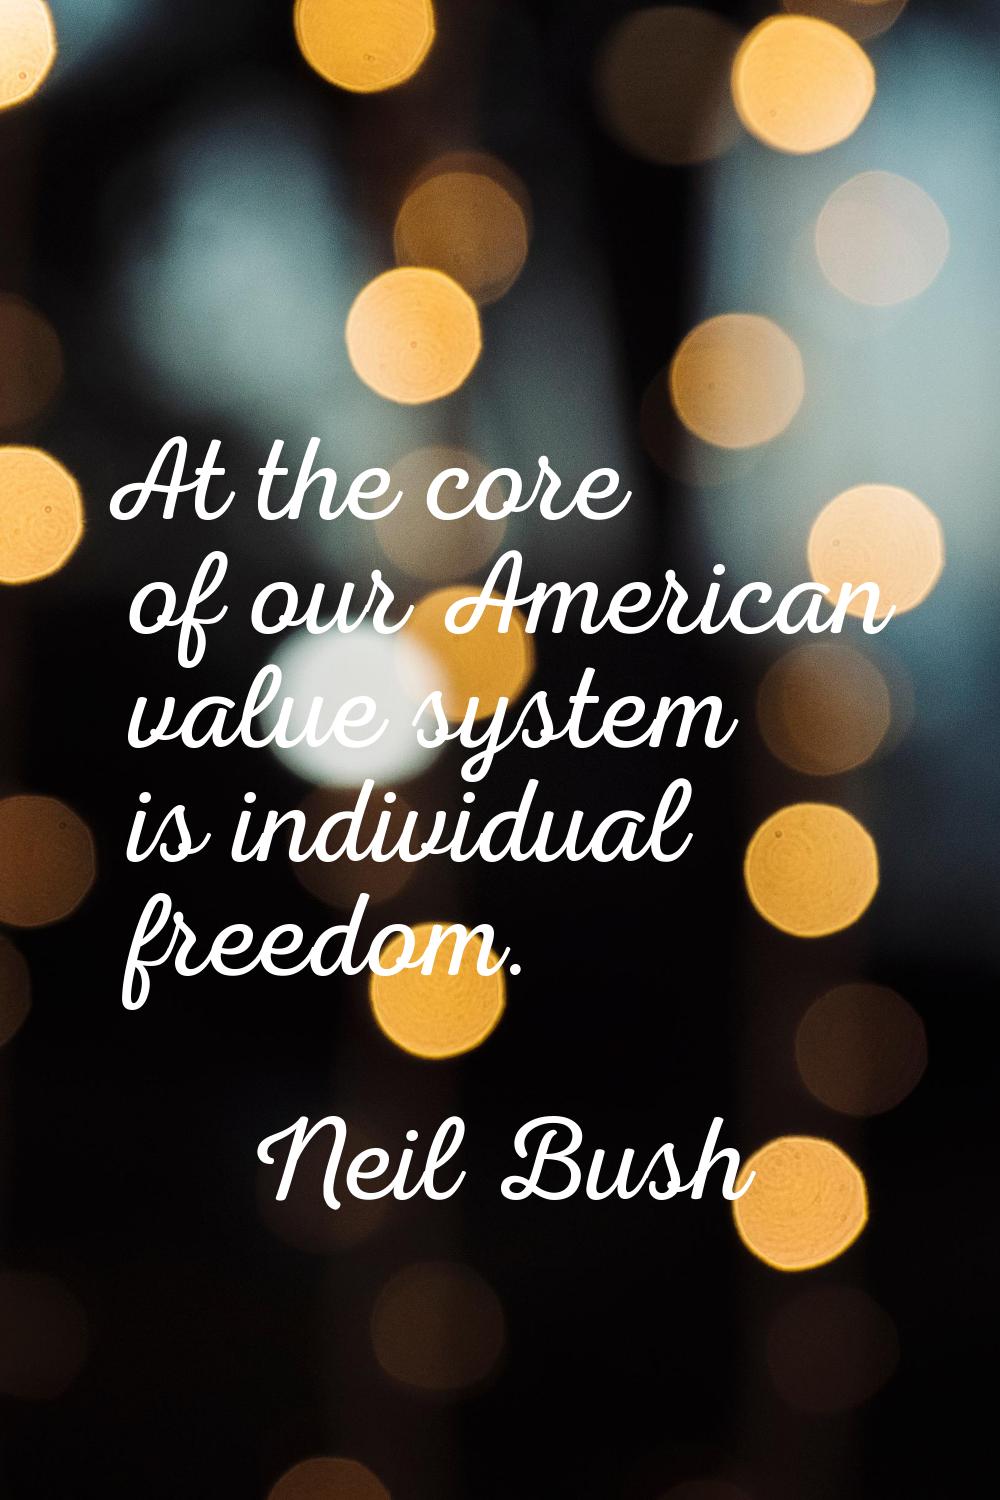 At the core of our American value system is individual freedom.